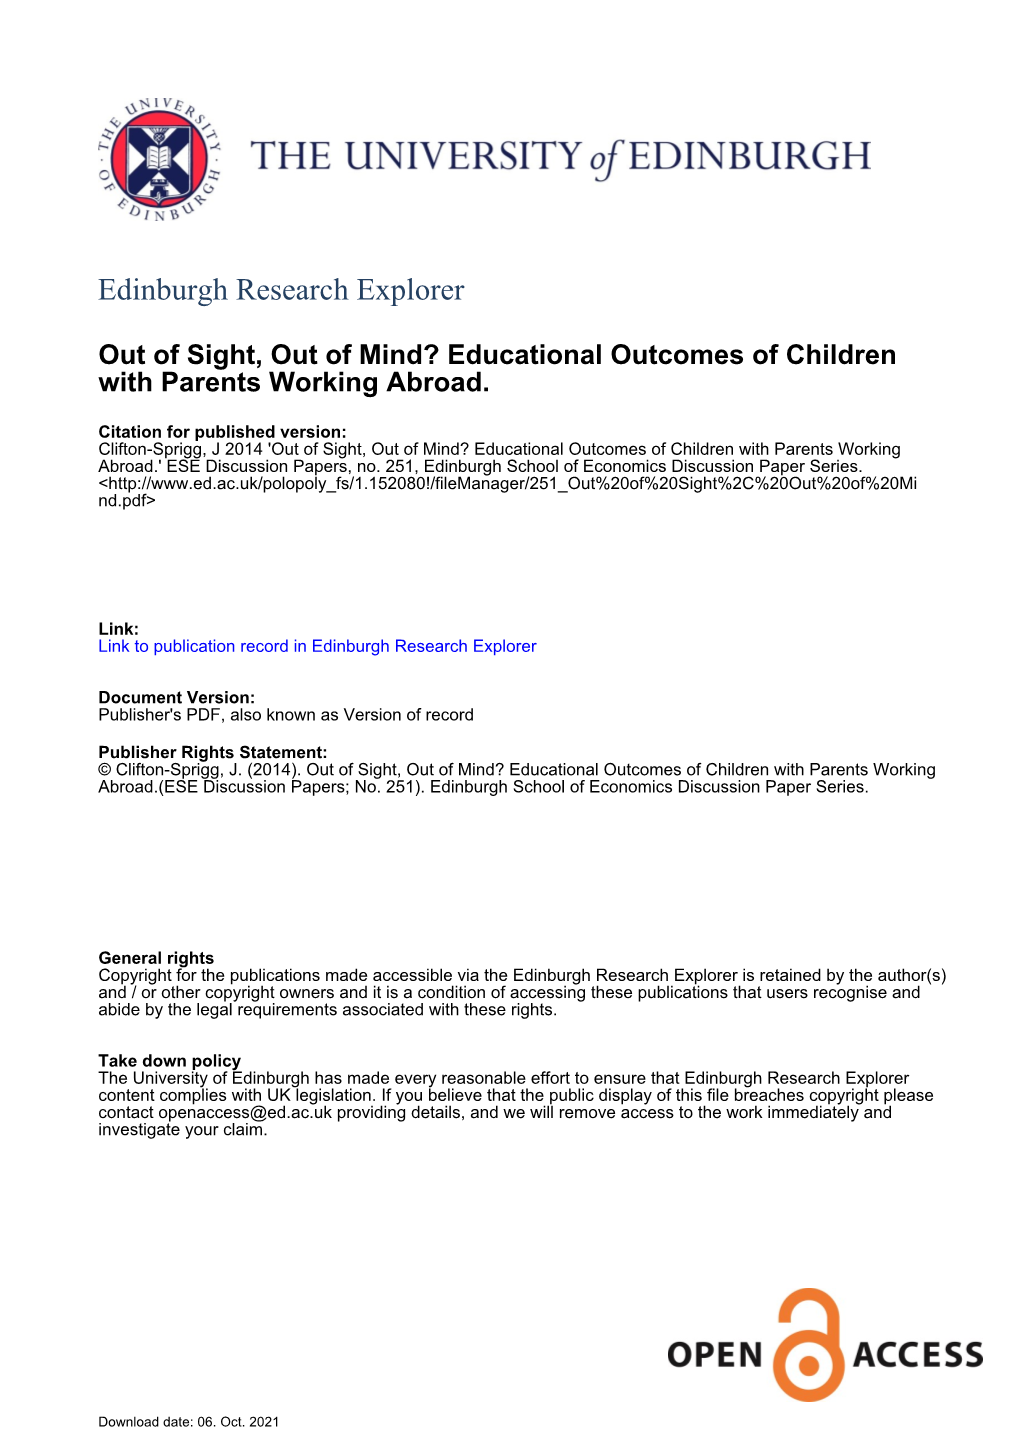 Educational Outcomes of Children with Parents Working Abroad